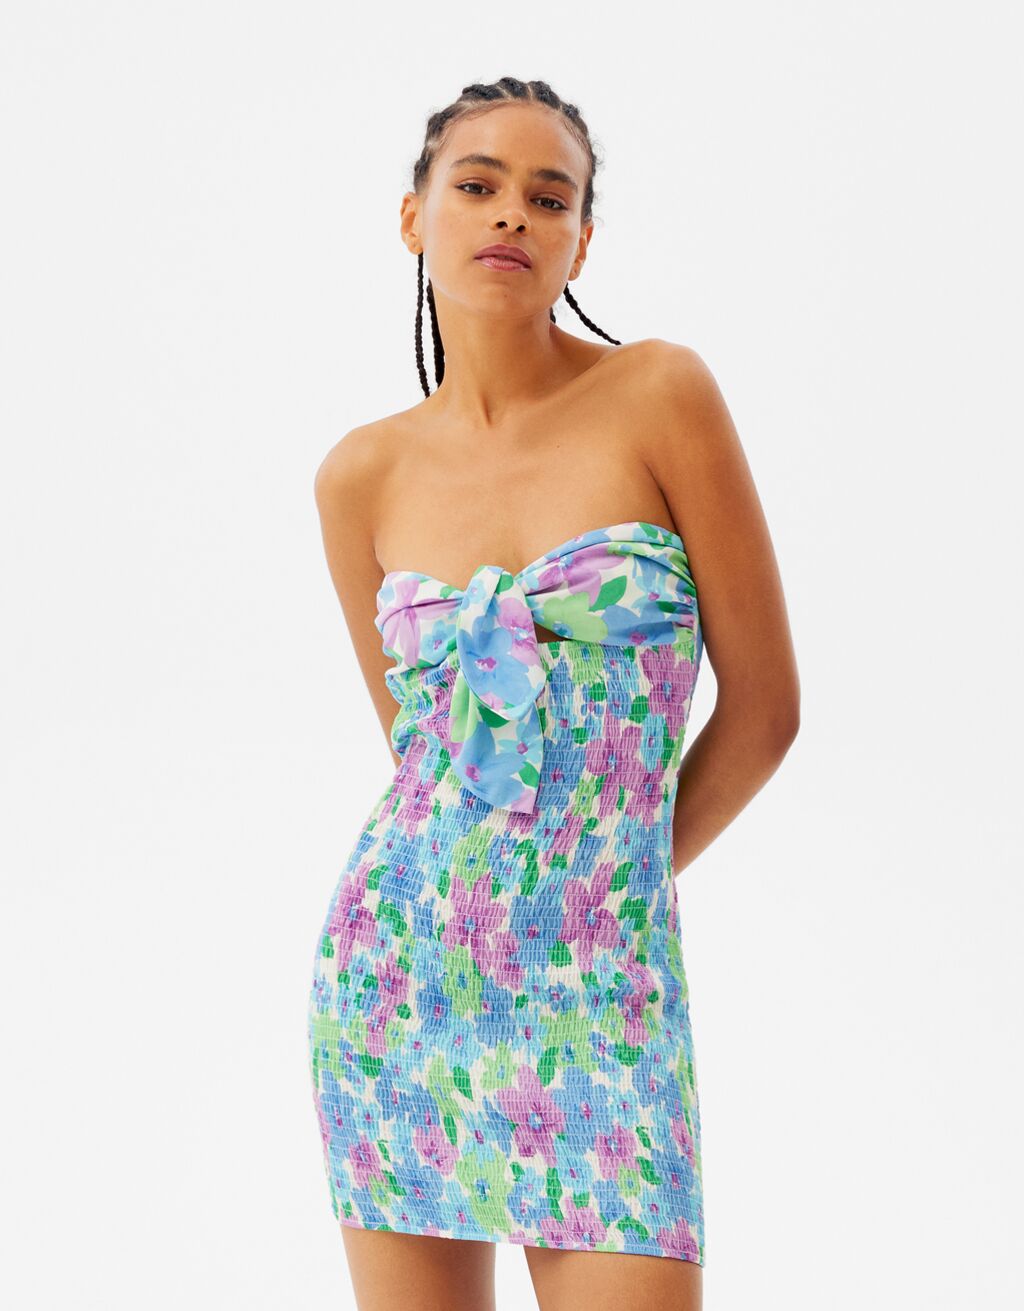 Floral print rubberized-finish dress with bow